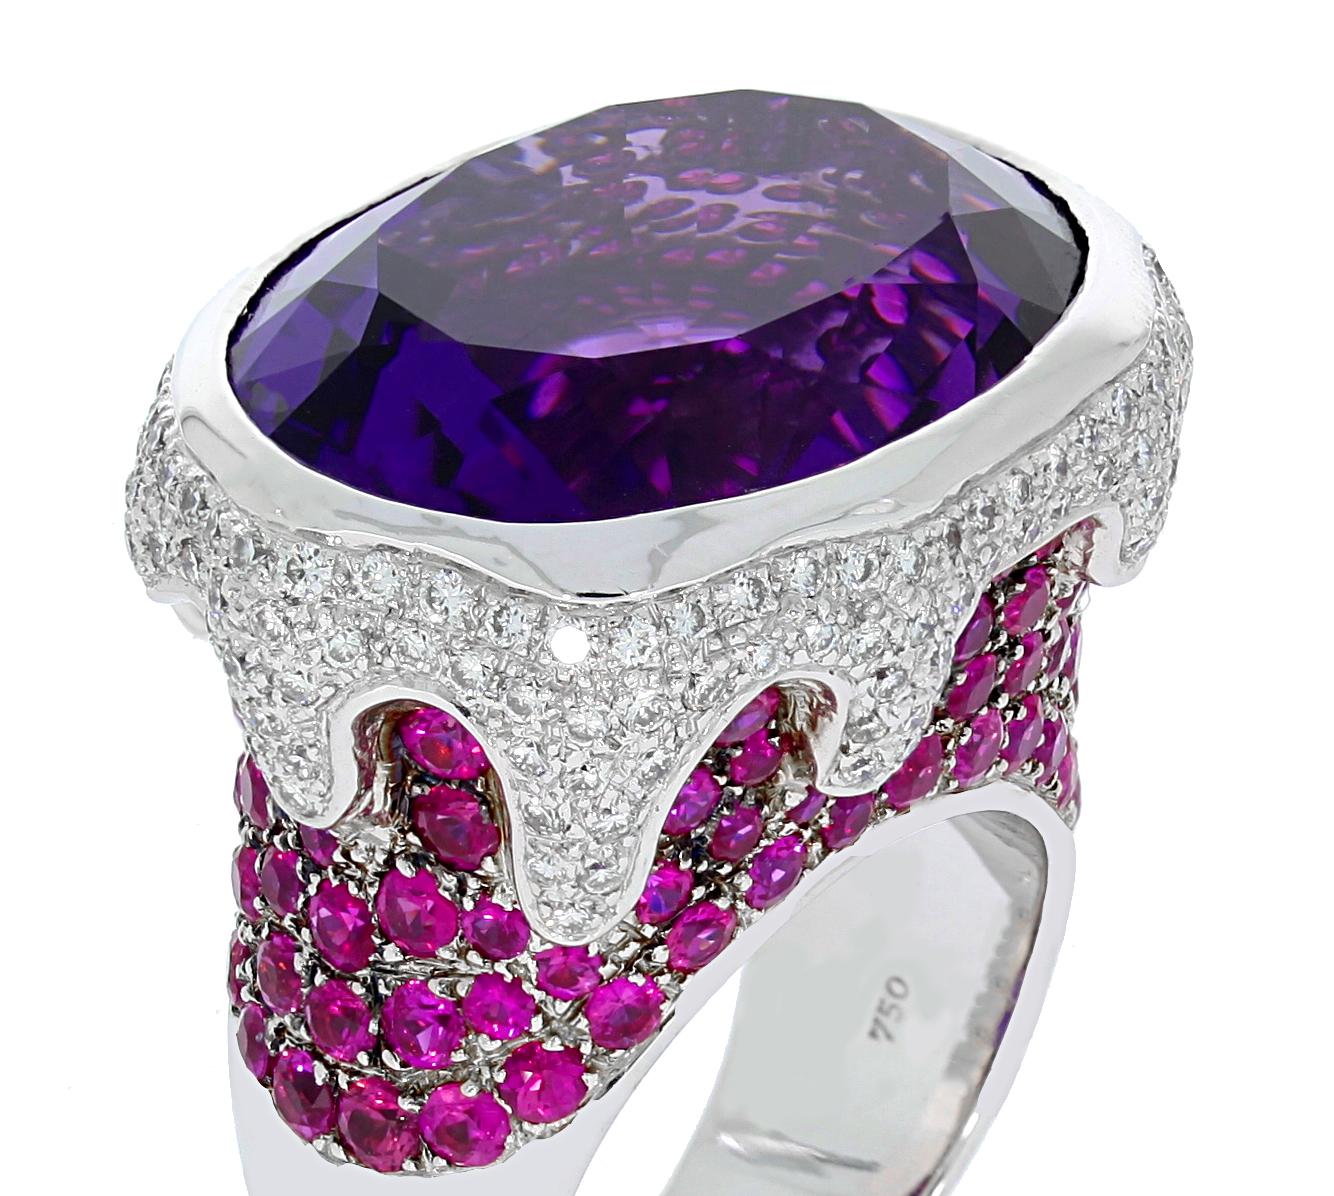 This sensational 18 carat white gold ring by Chatila features a luxurious 26.58 carat rich purple amethyst gemstone, accentuated by 175 white diamonds with a total weight of 1.04 carats, as well as 26.58 carats of 105 pave-set pink rubies.